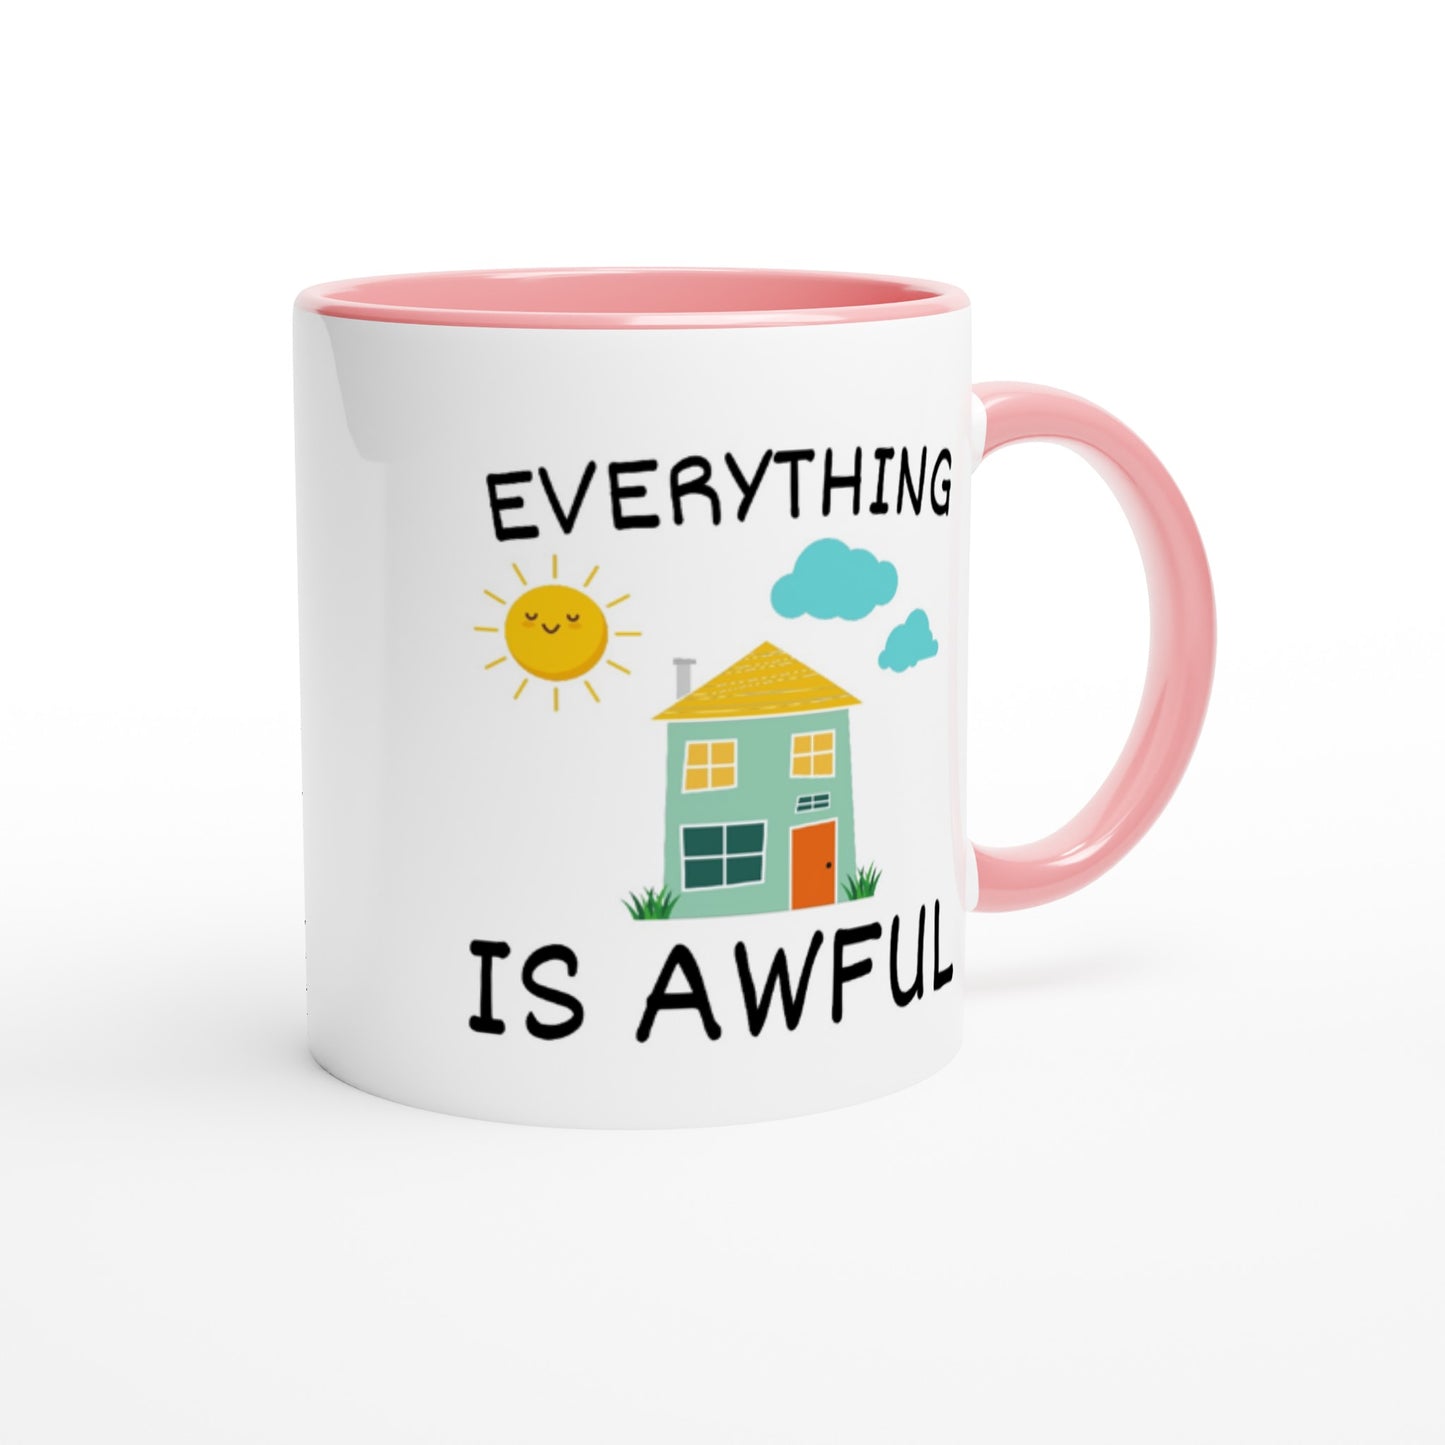 Everything is Awful - White 11oz Ceramic Mug with Color Inside